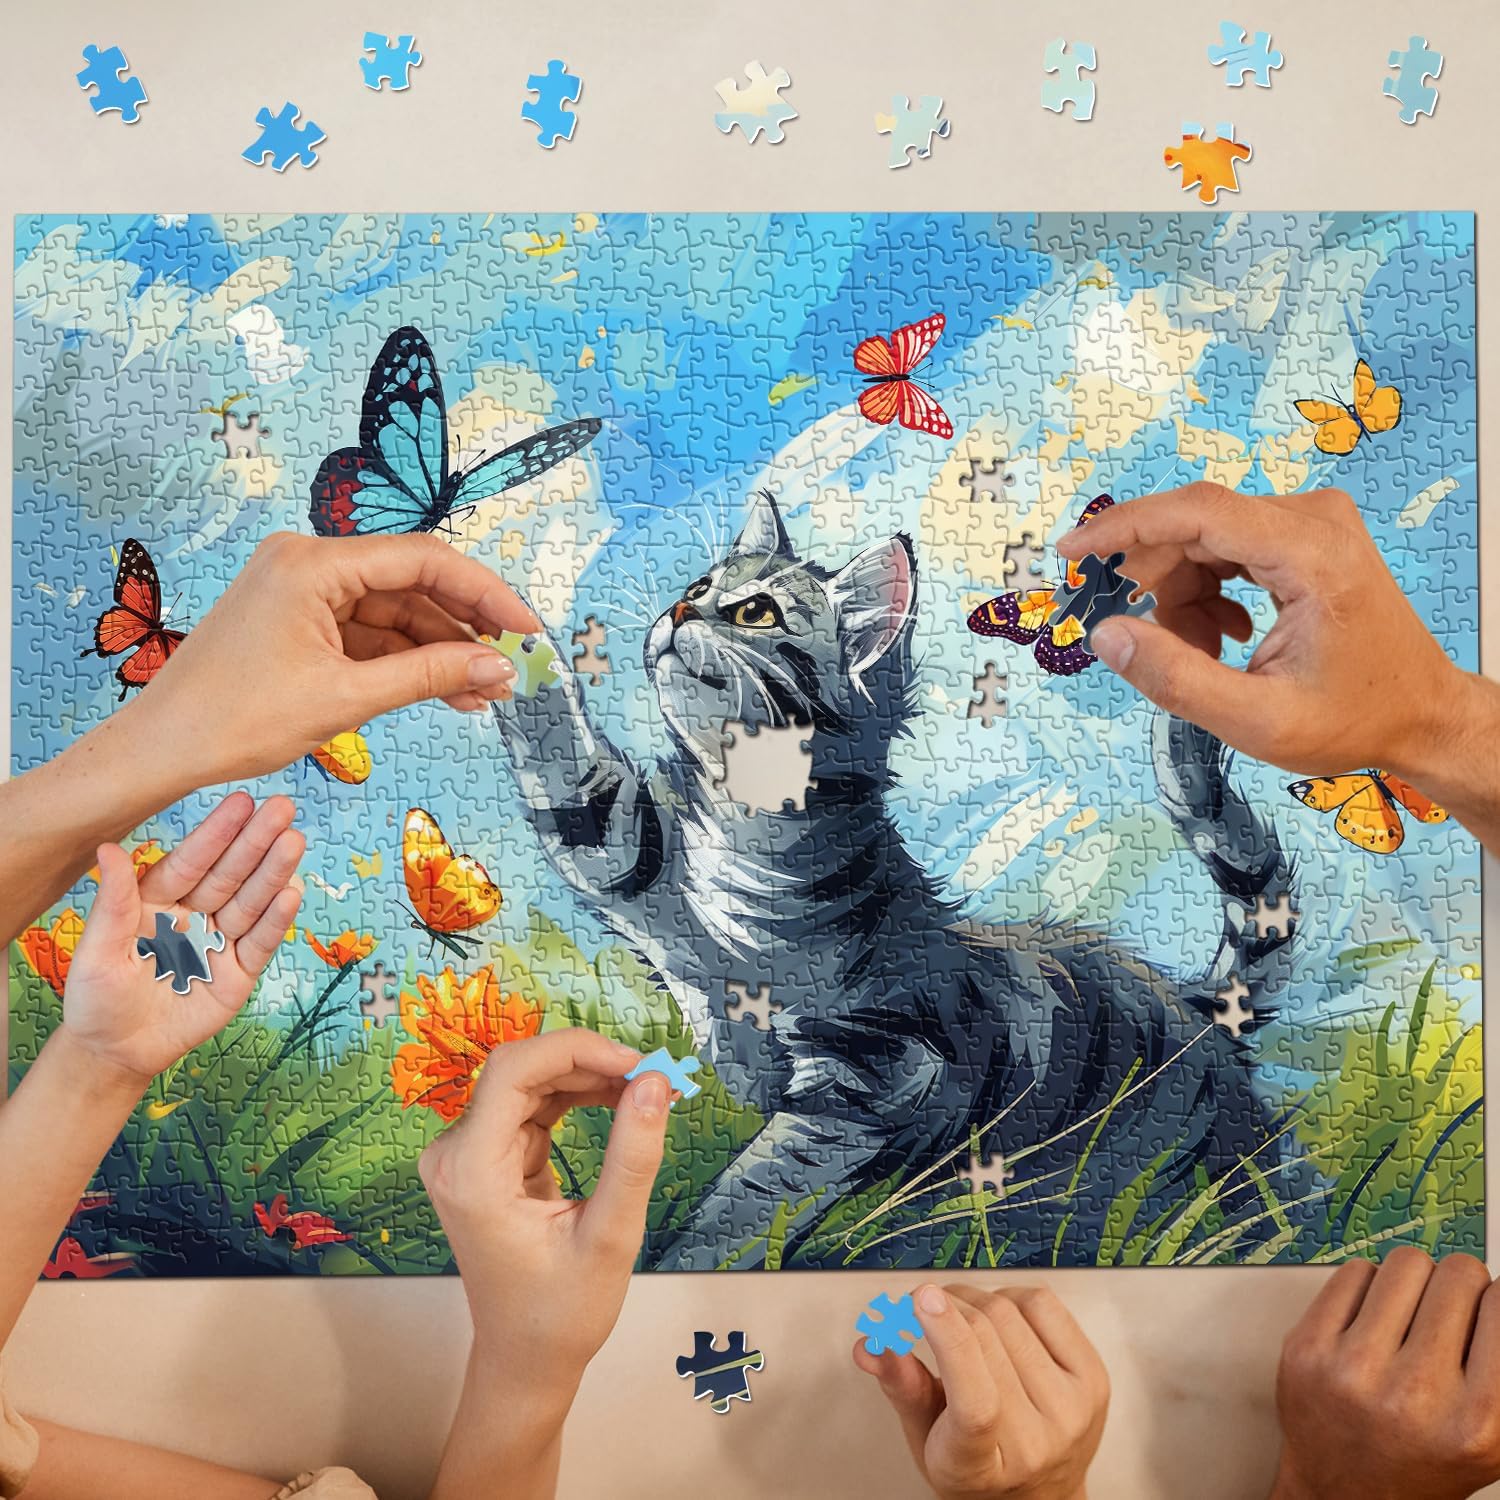 Cat Chasing Butterfly Jigsaw Puzzles 1000 Pieces